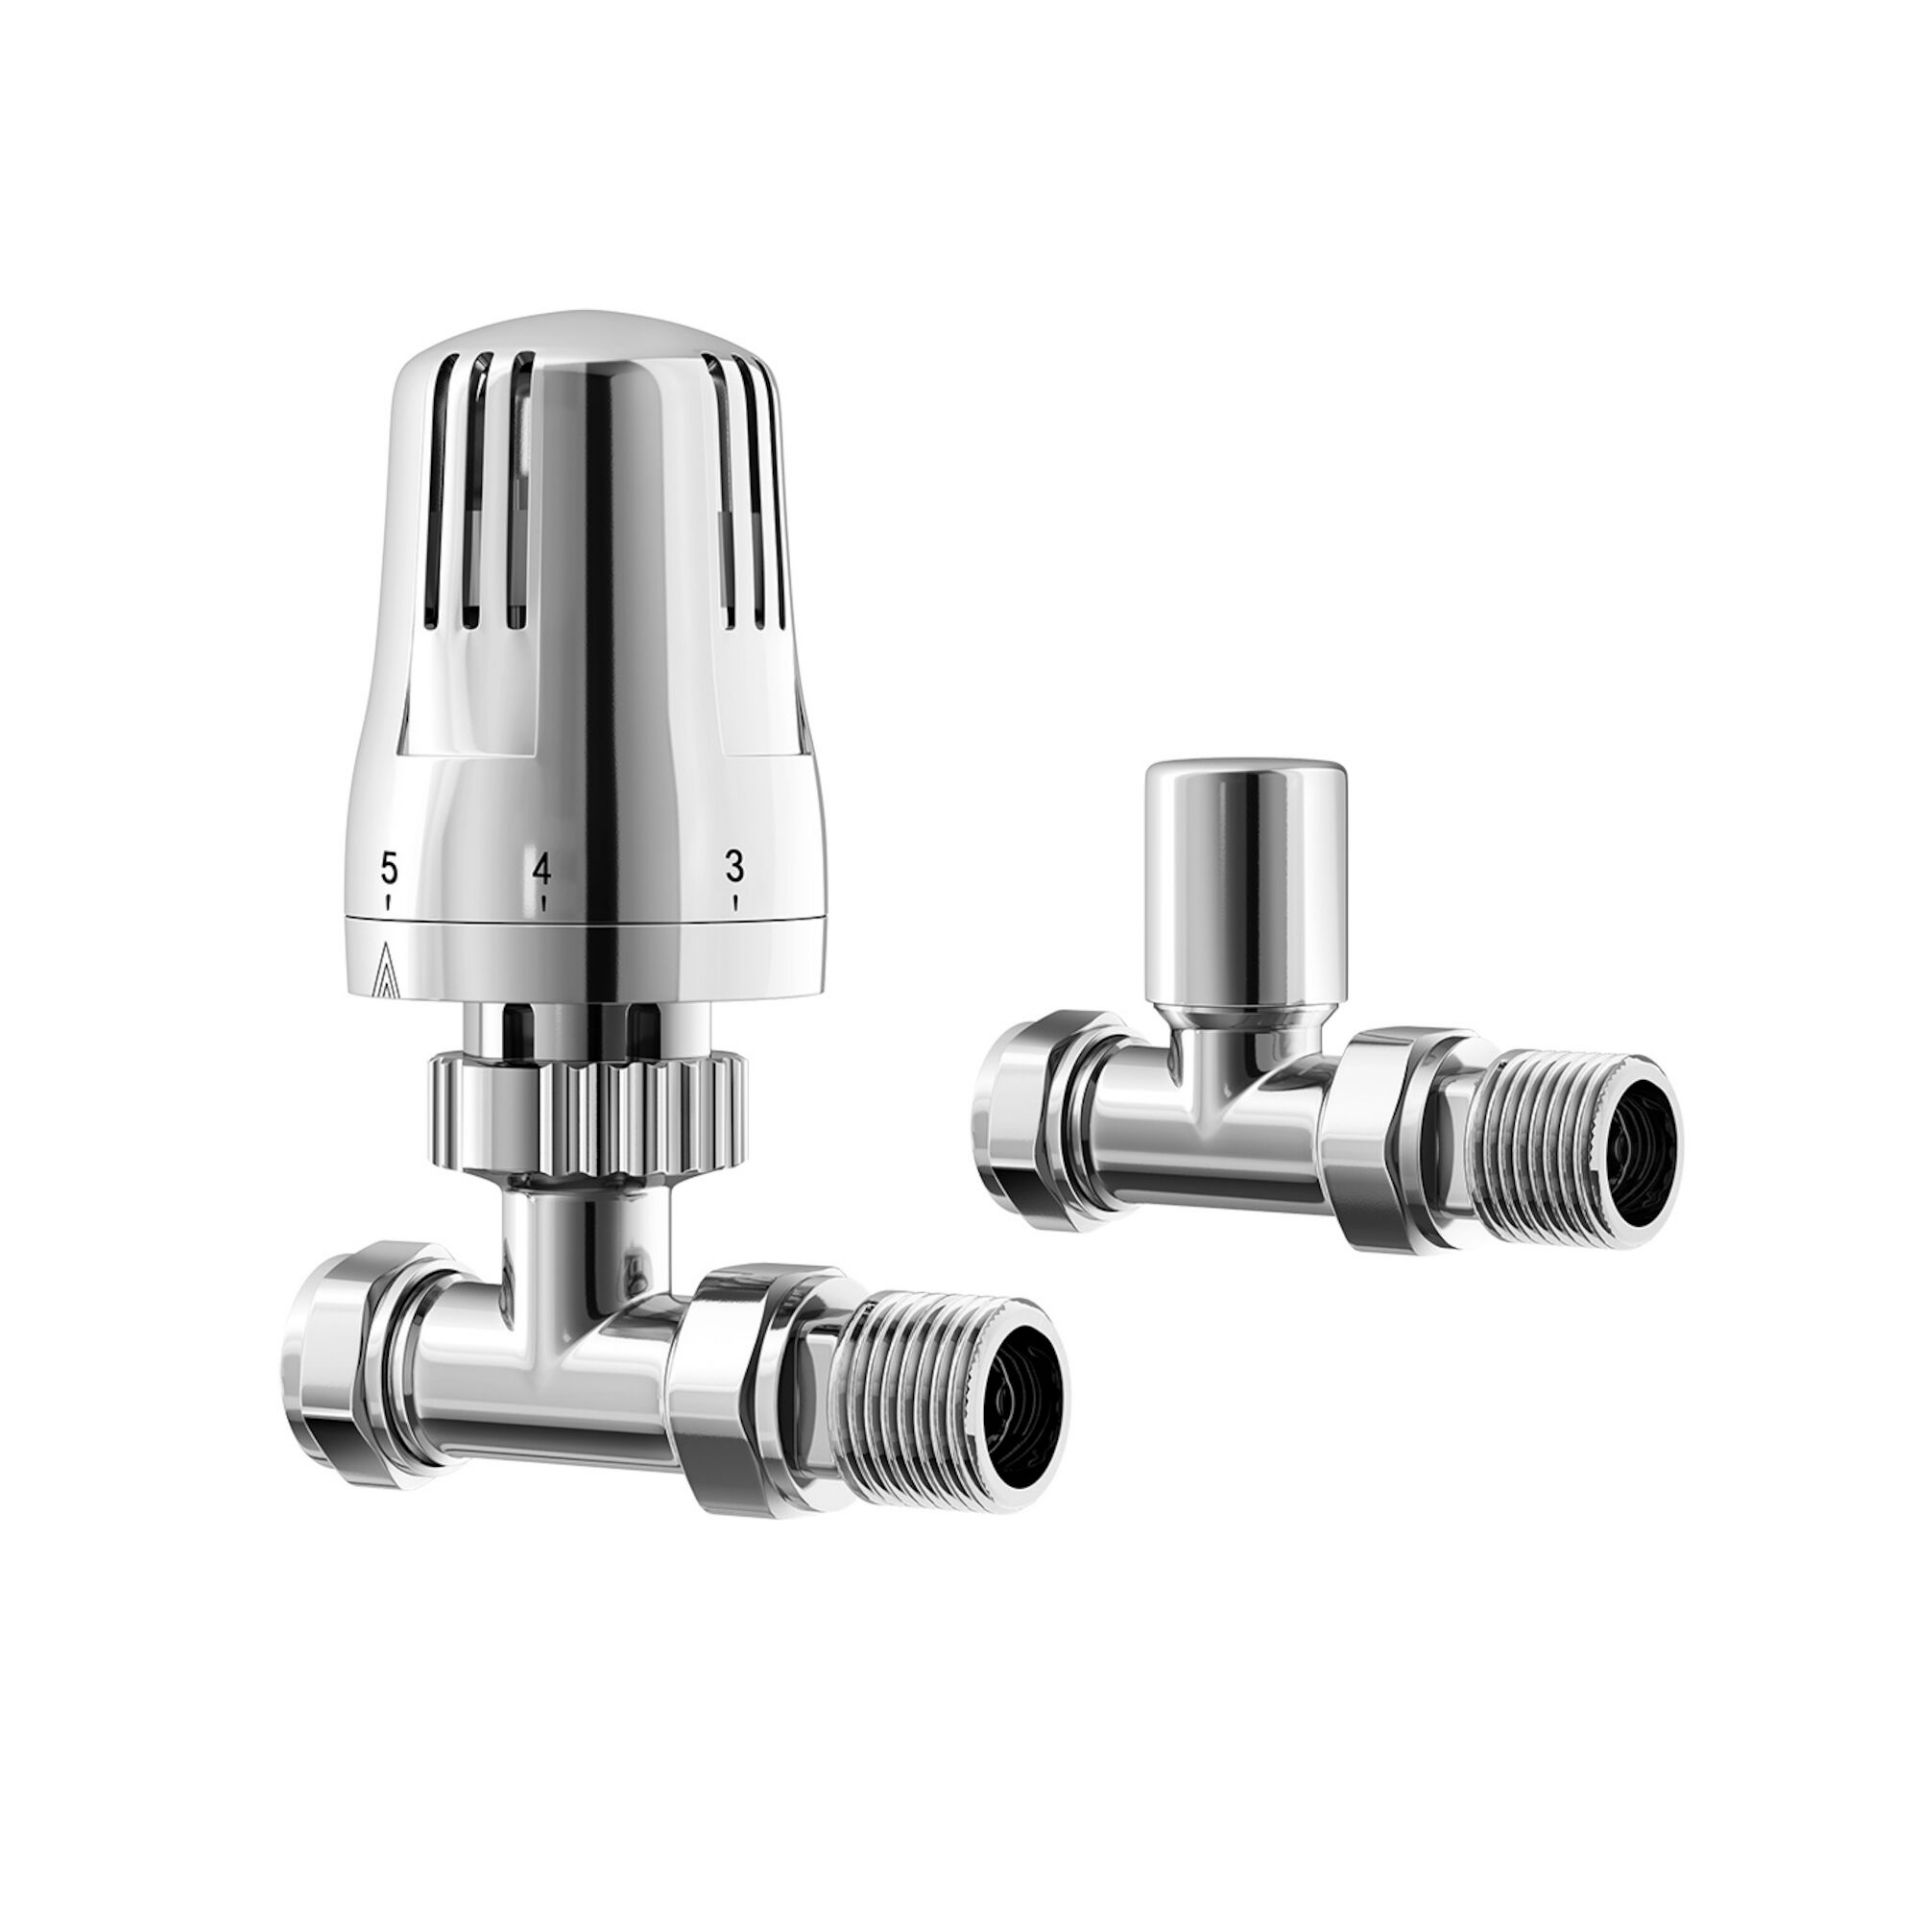 (EE1006) 15mm Standard Connection Thermostatic Straight Chrome Radiator Valves Chrome Plated S... - Image 2 of 3